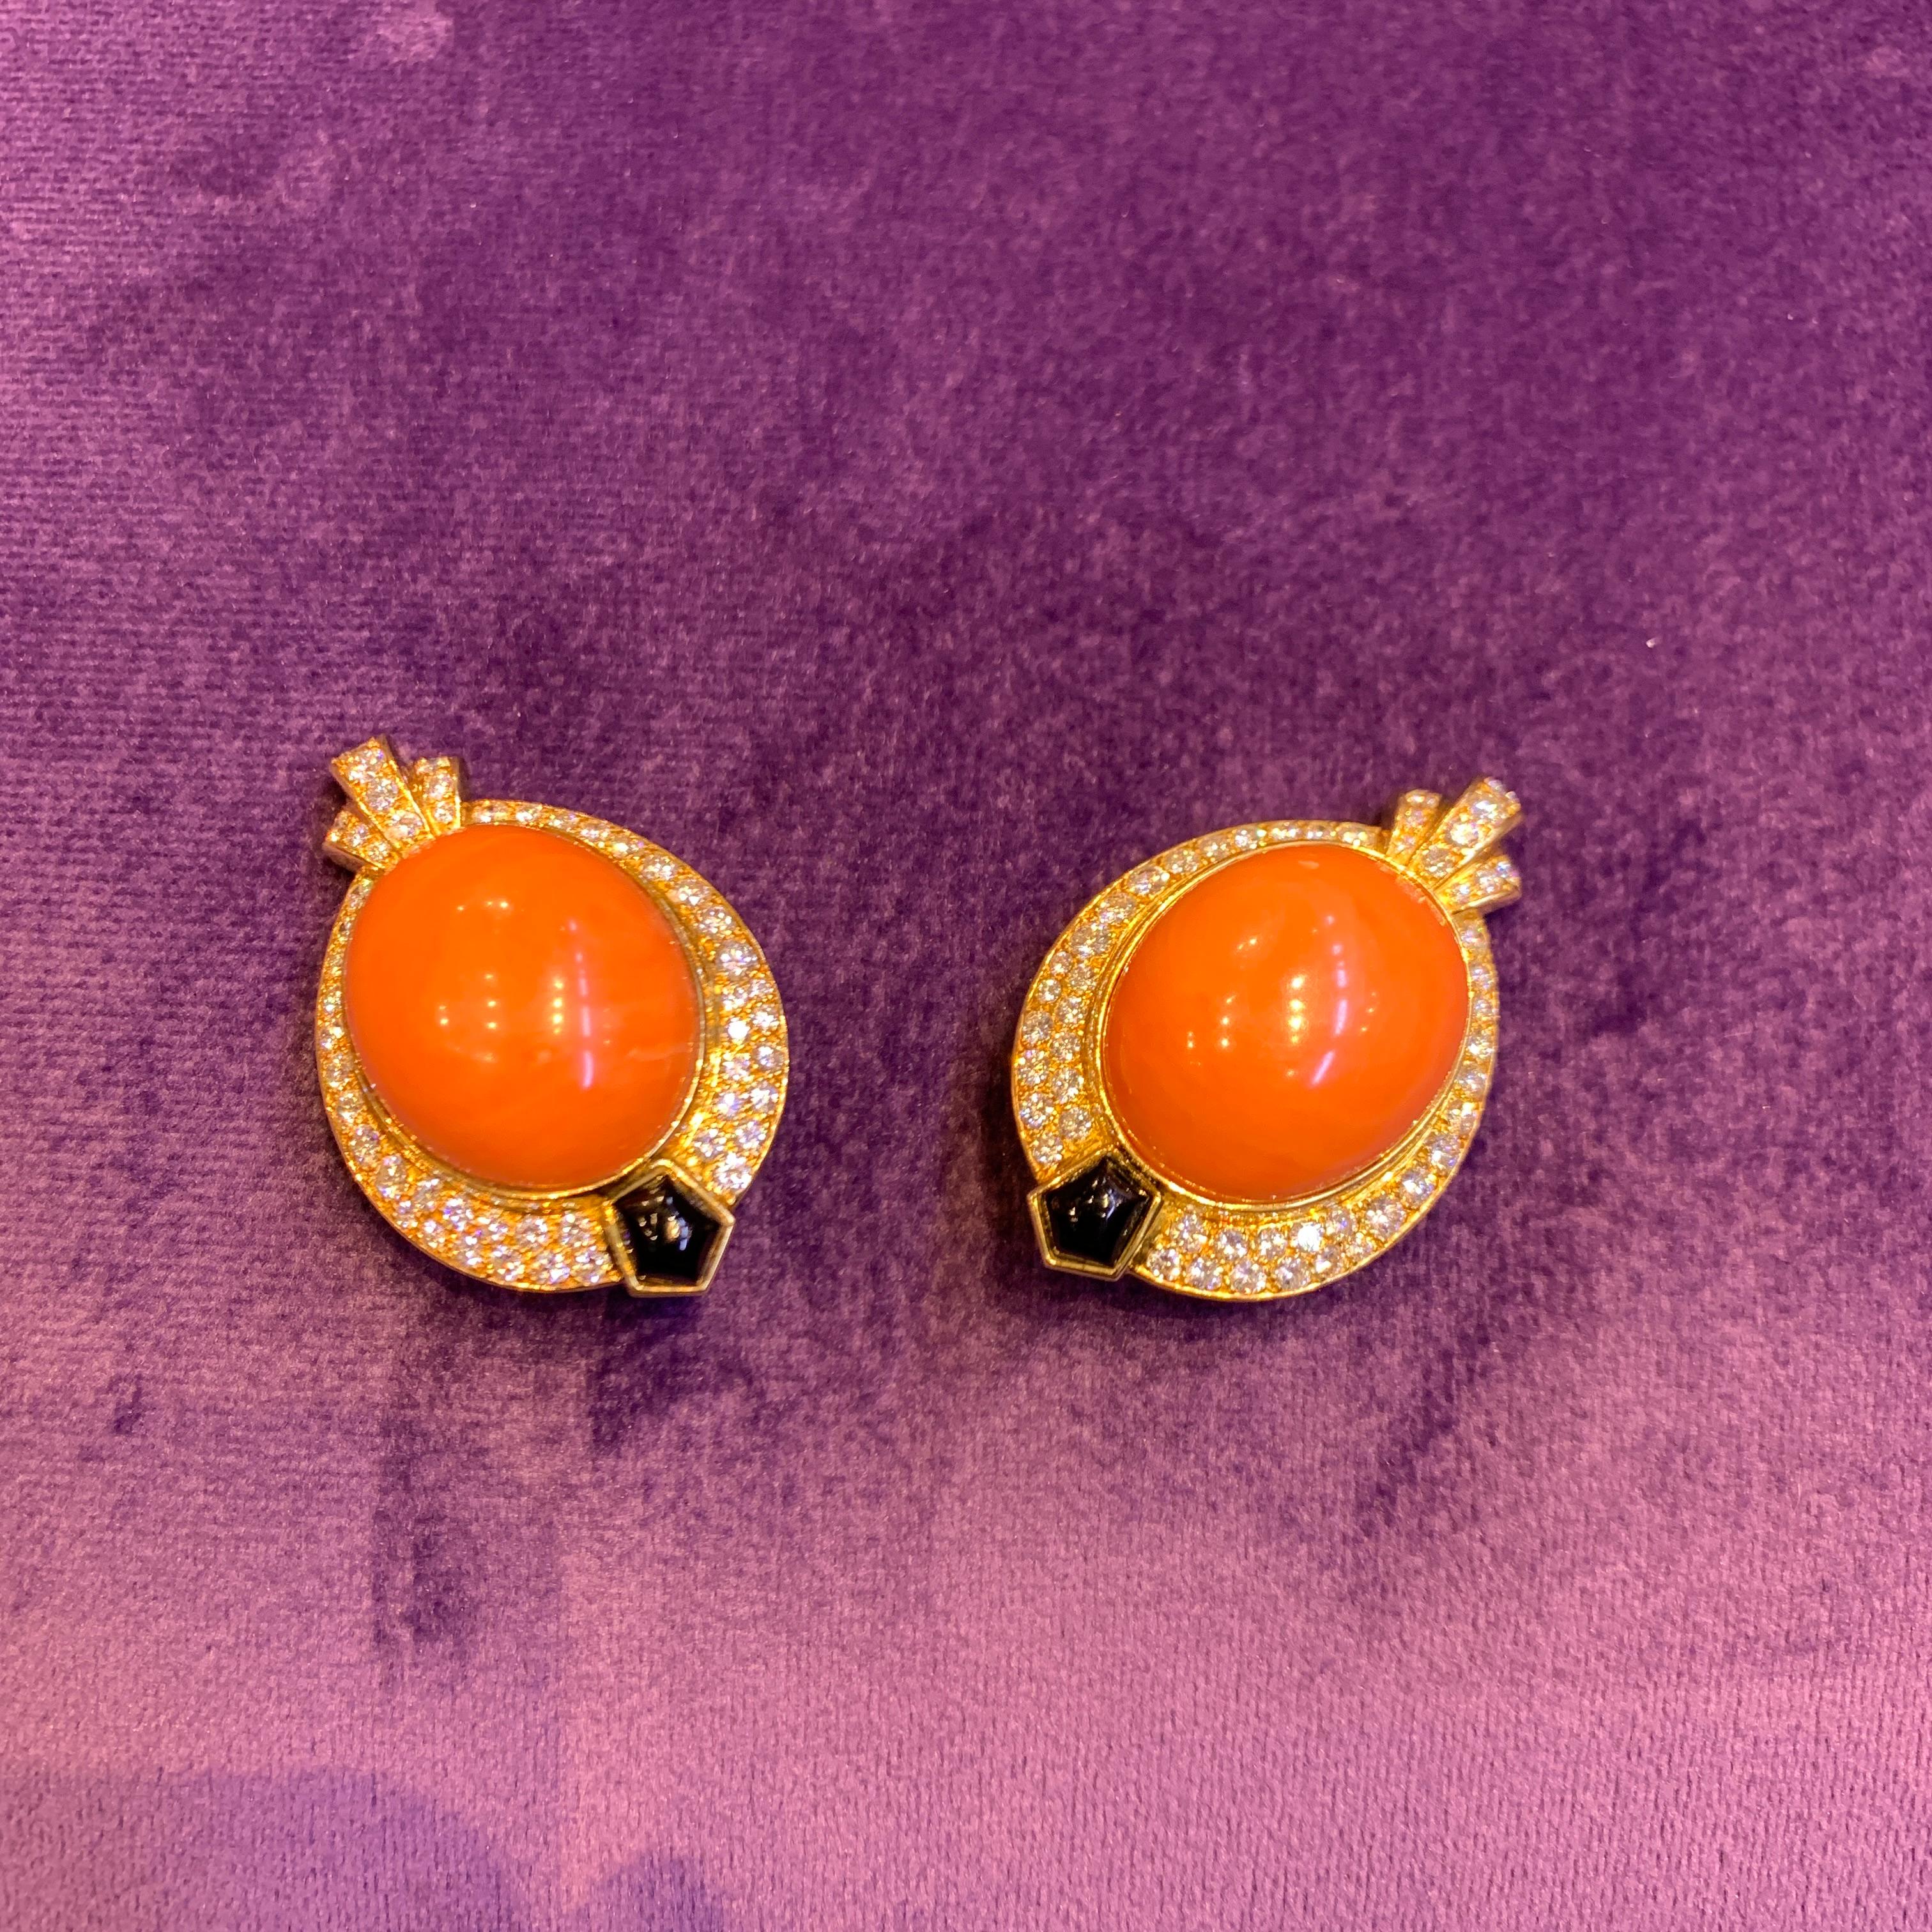 Cartier Egyptian Revival Coral Diamond & Onyx Earrings For Sale 2